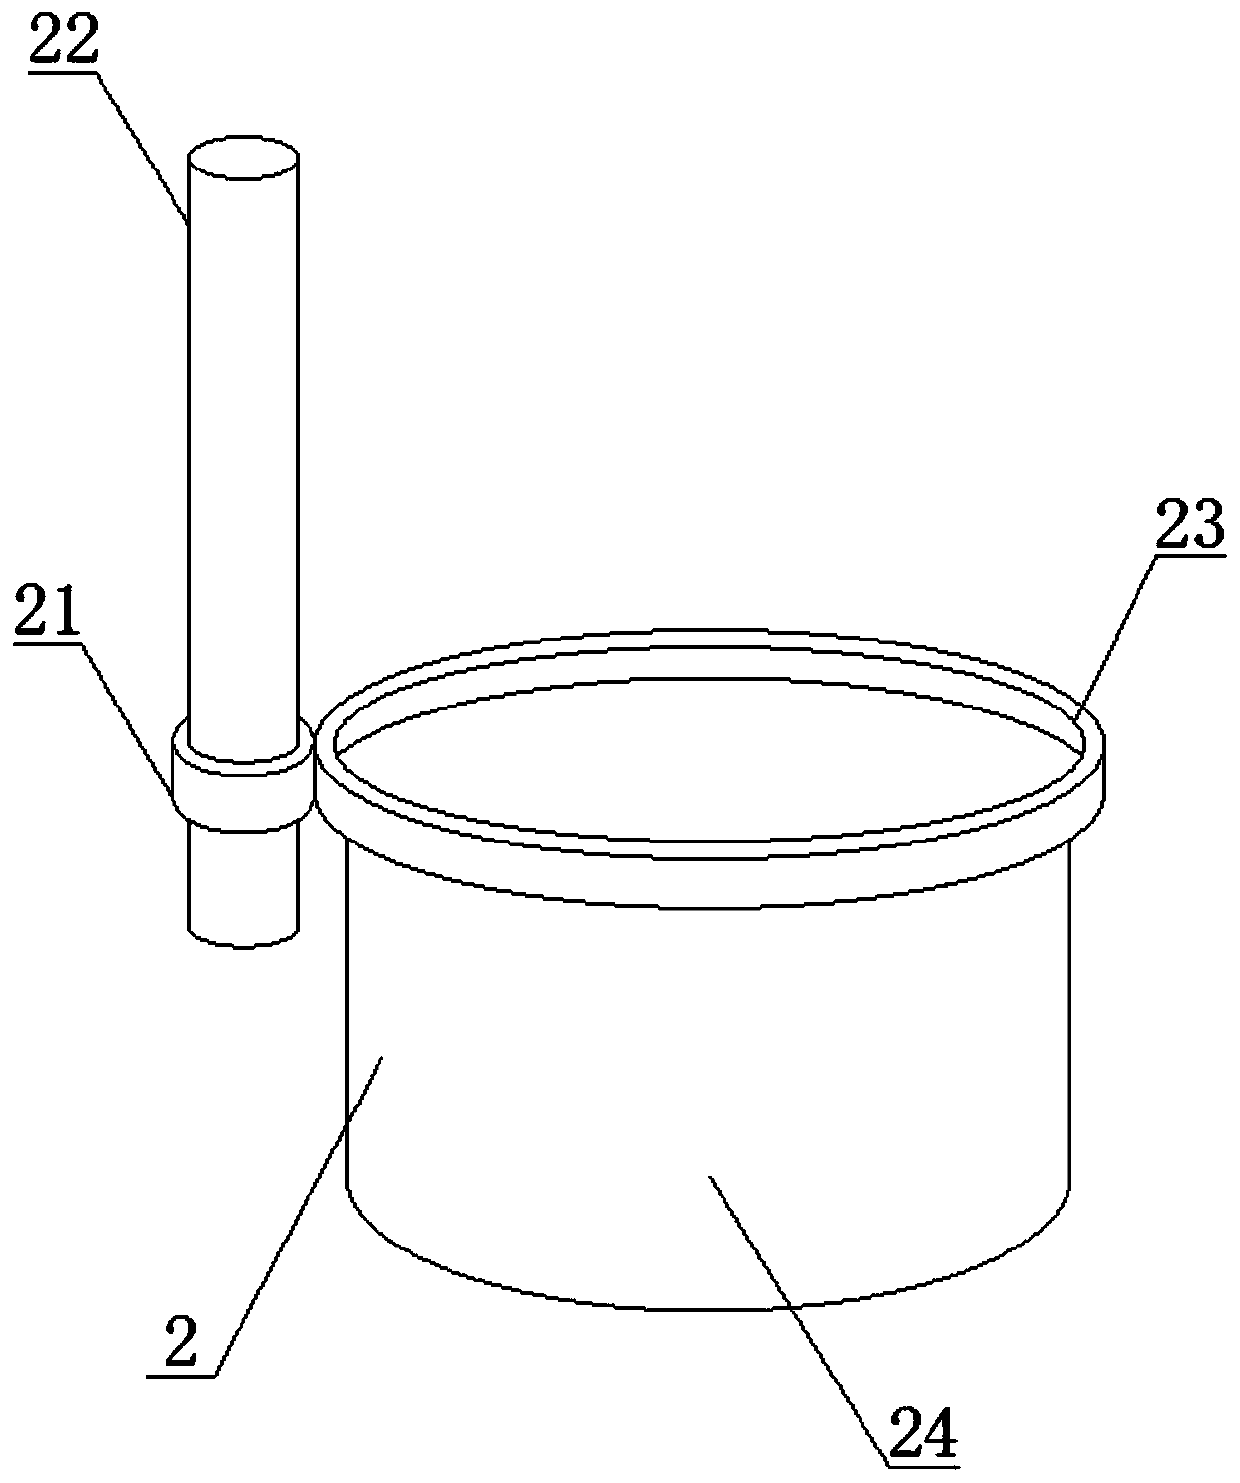 Treating device externally applied to mammal body